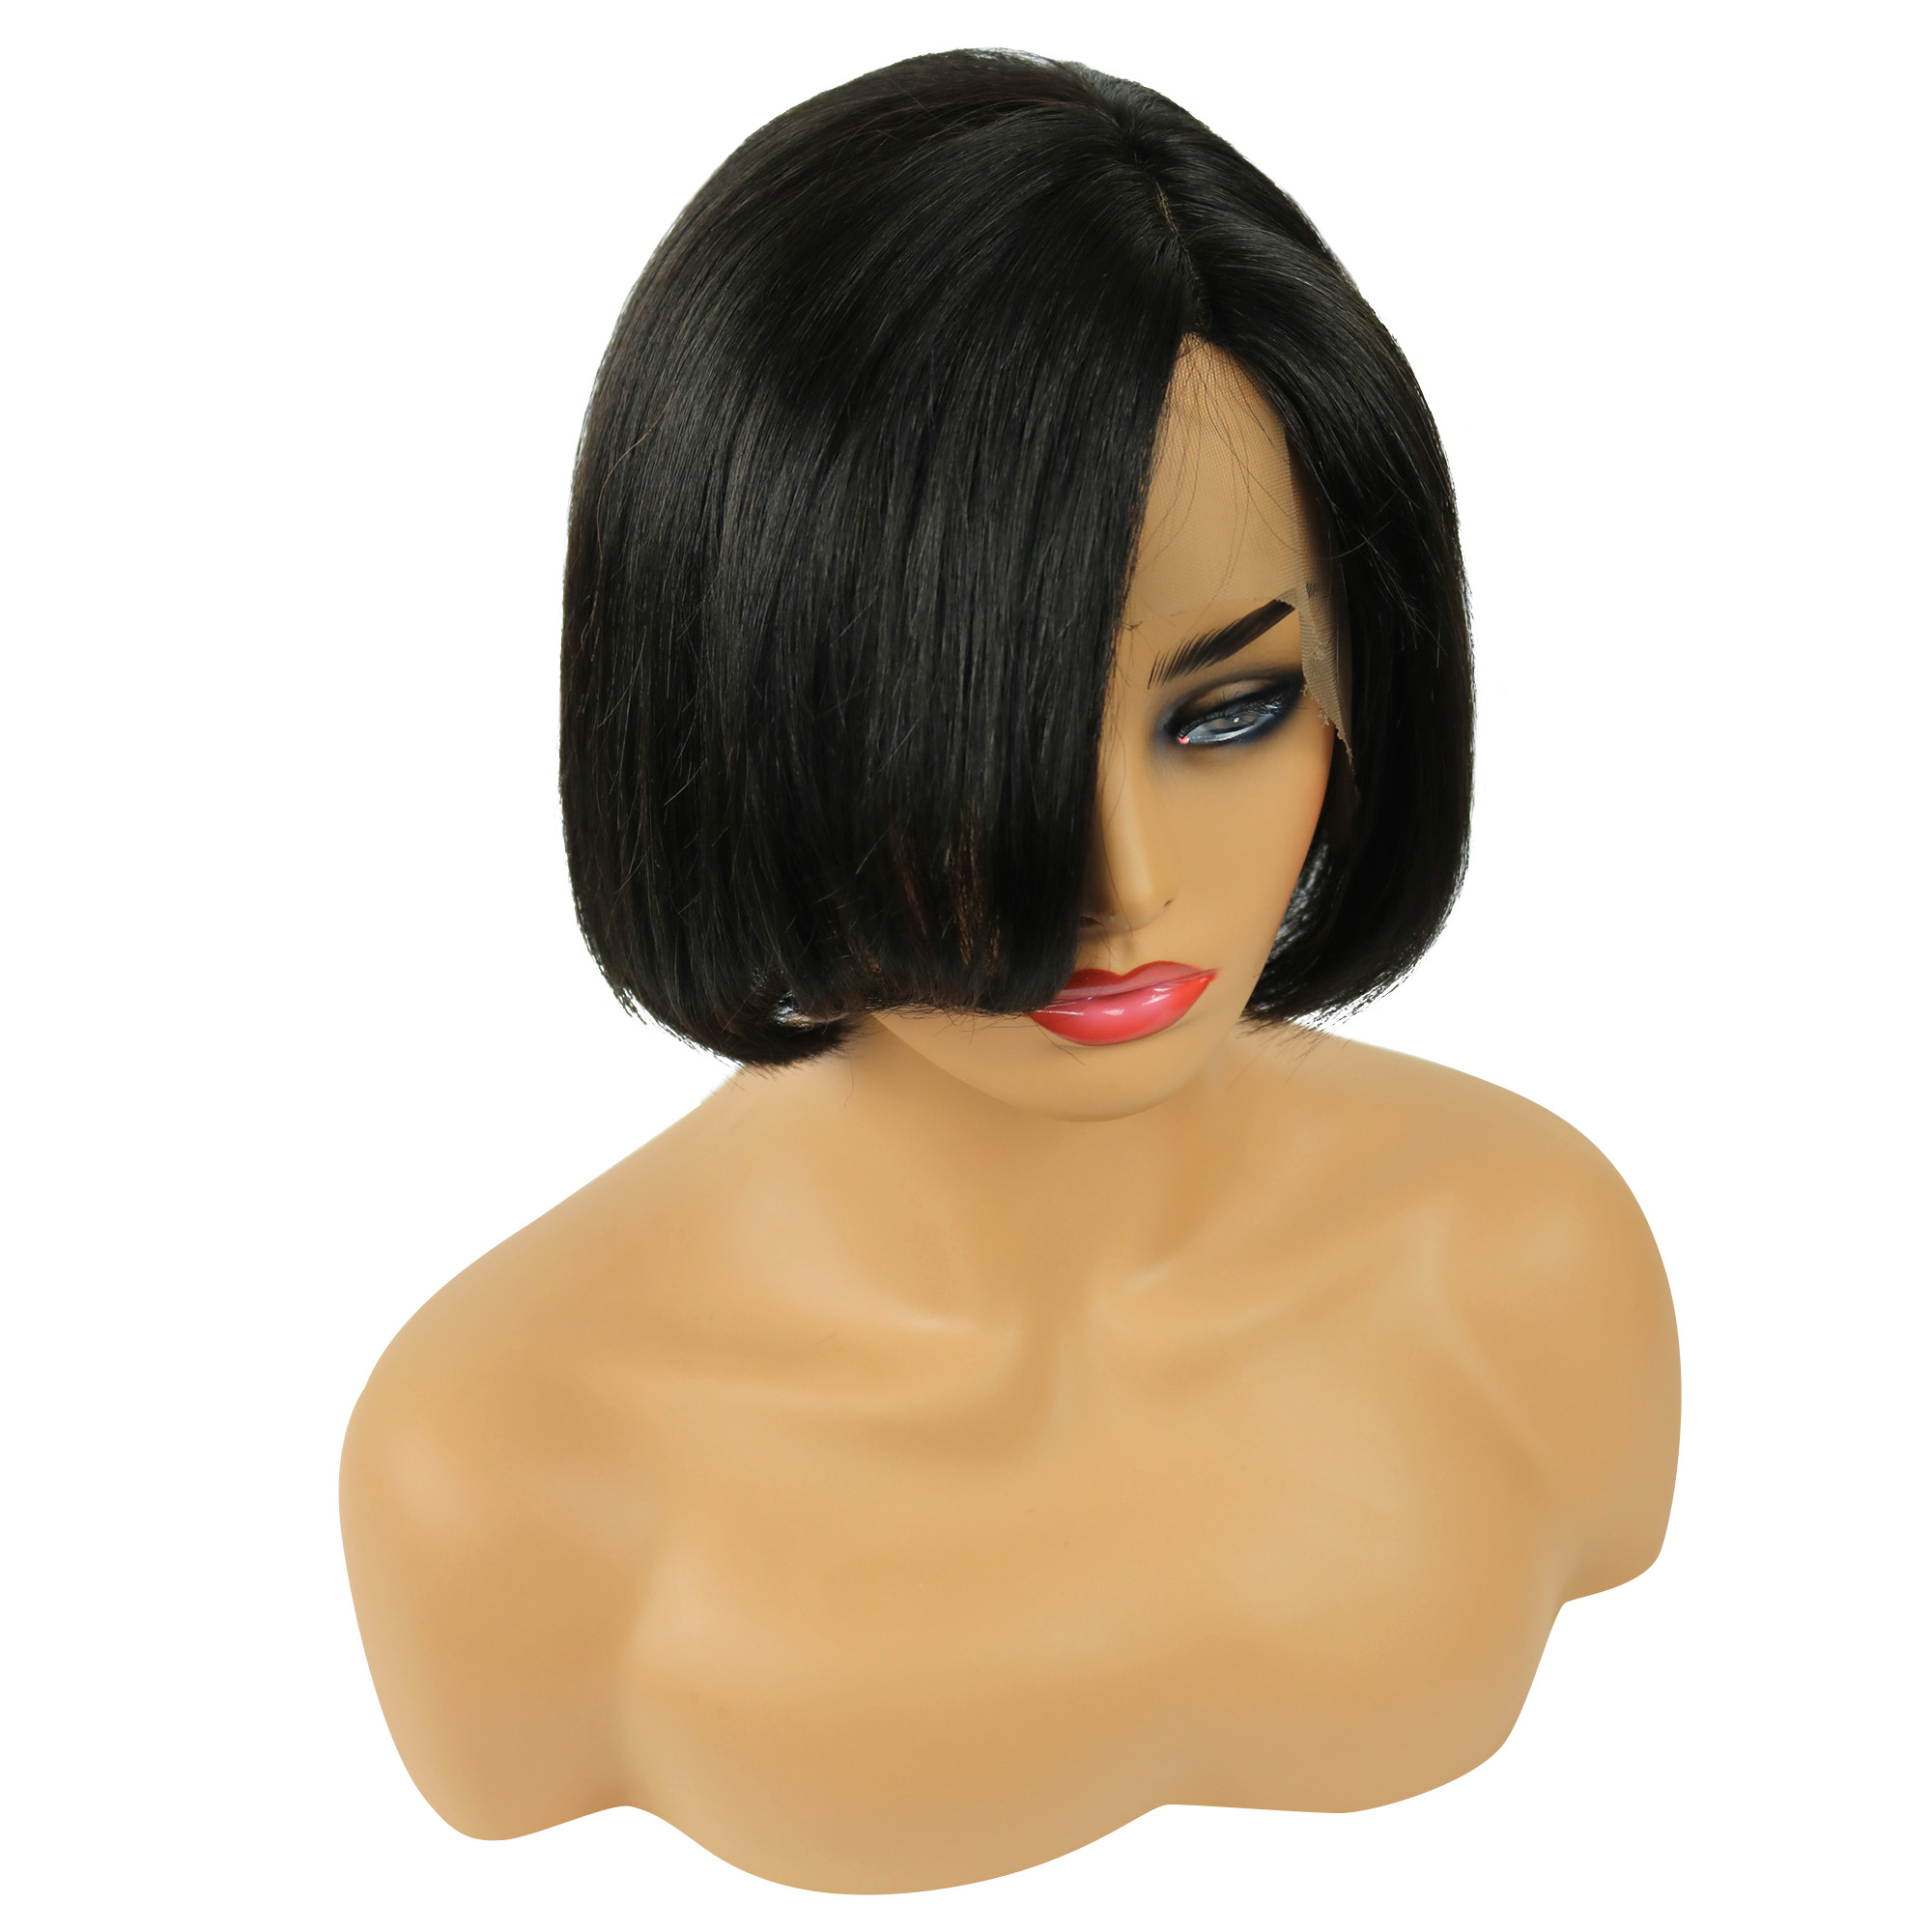 Straight Women Lace Front Cap Human Hair 120% 8 Inches Wigs -  Bob Hair wigs